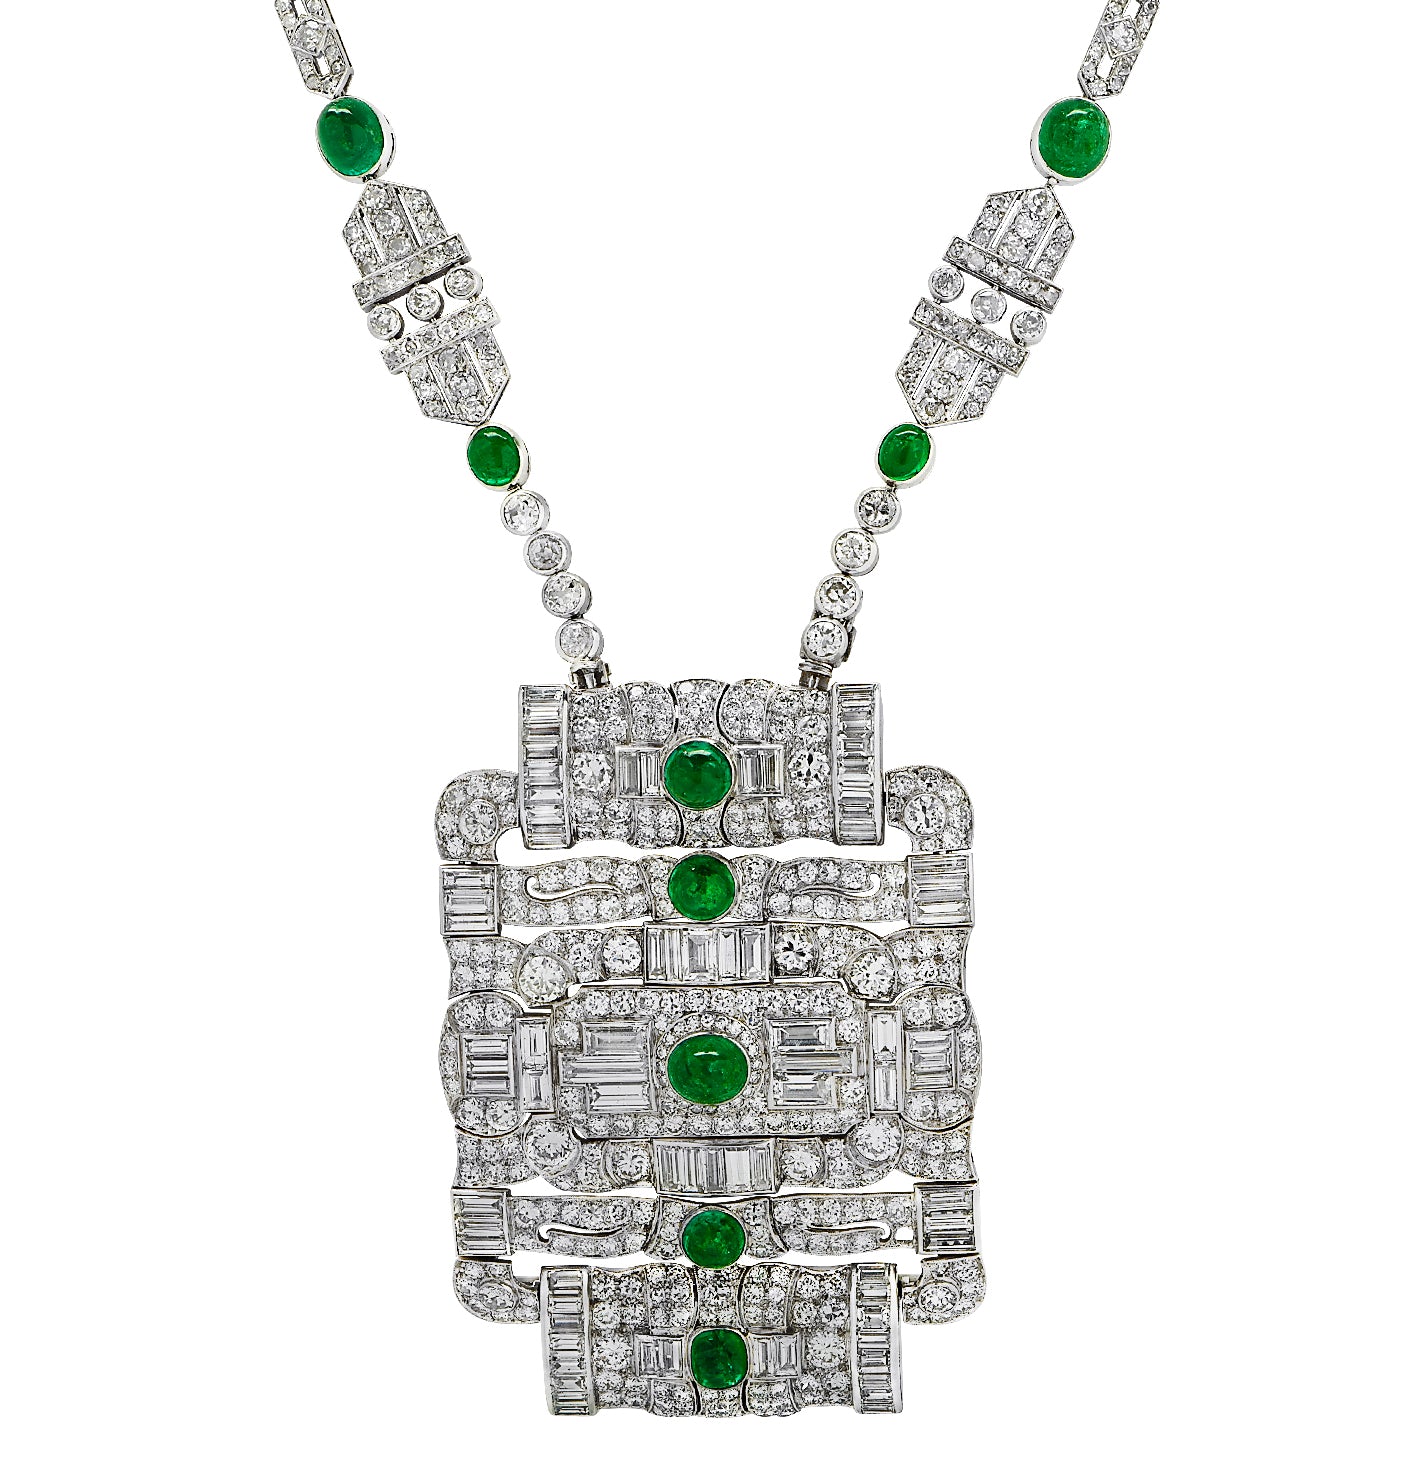 Indian Emerald Necklace | Colombia Art deco, Indian-style ne… | Flickr